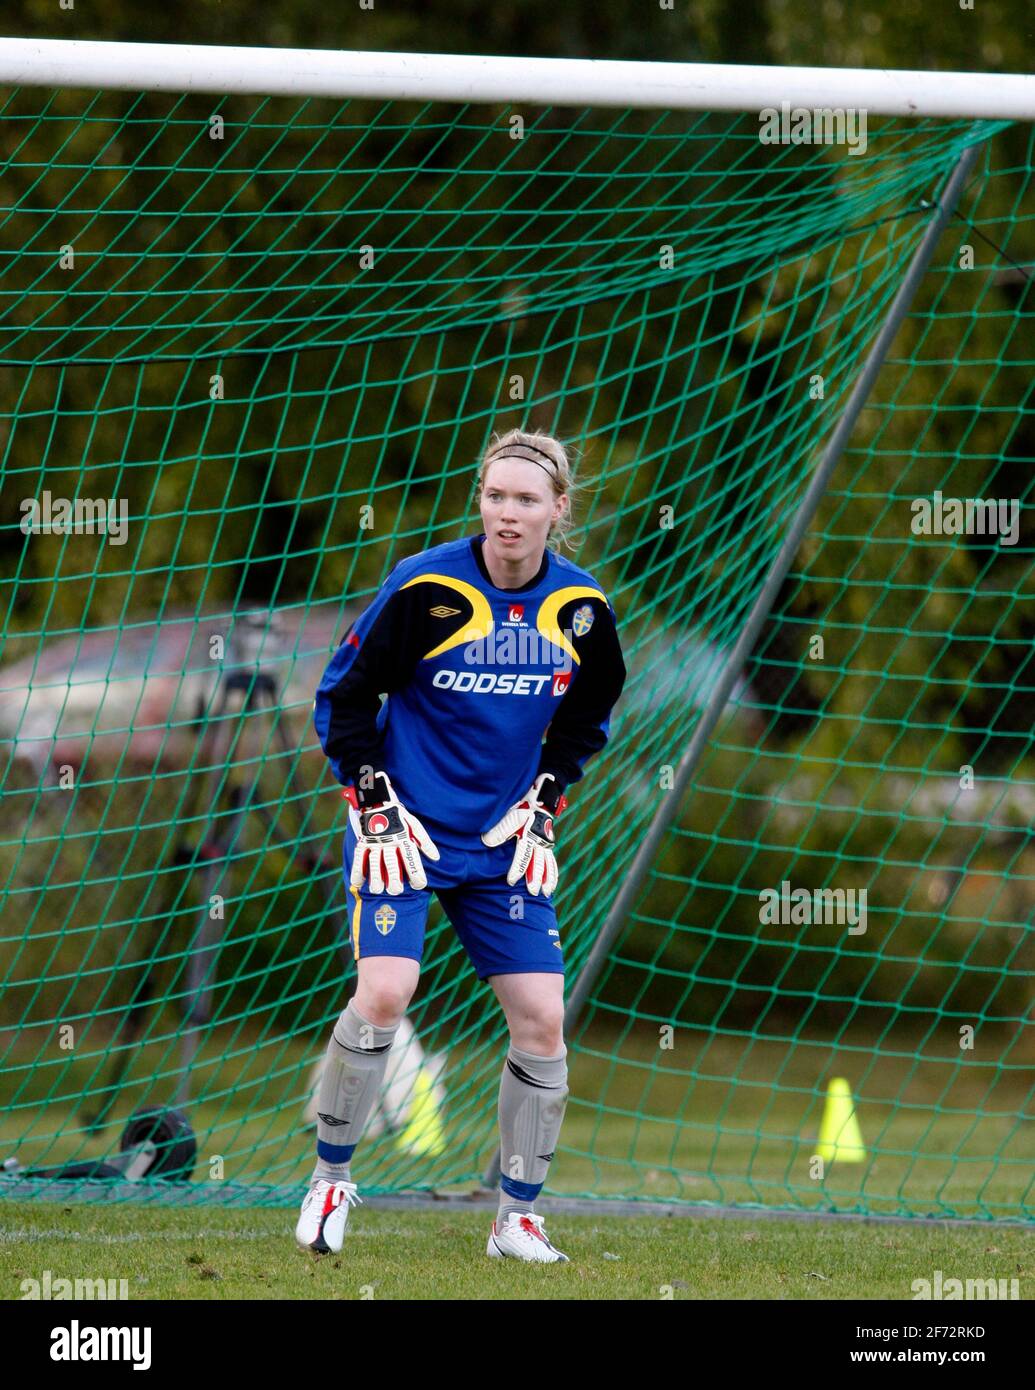 Hedvig Lindahl during the Swedish women's national team's World Cup